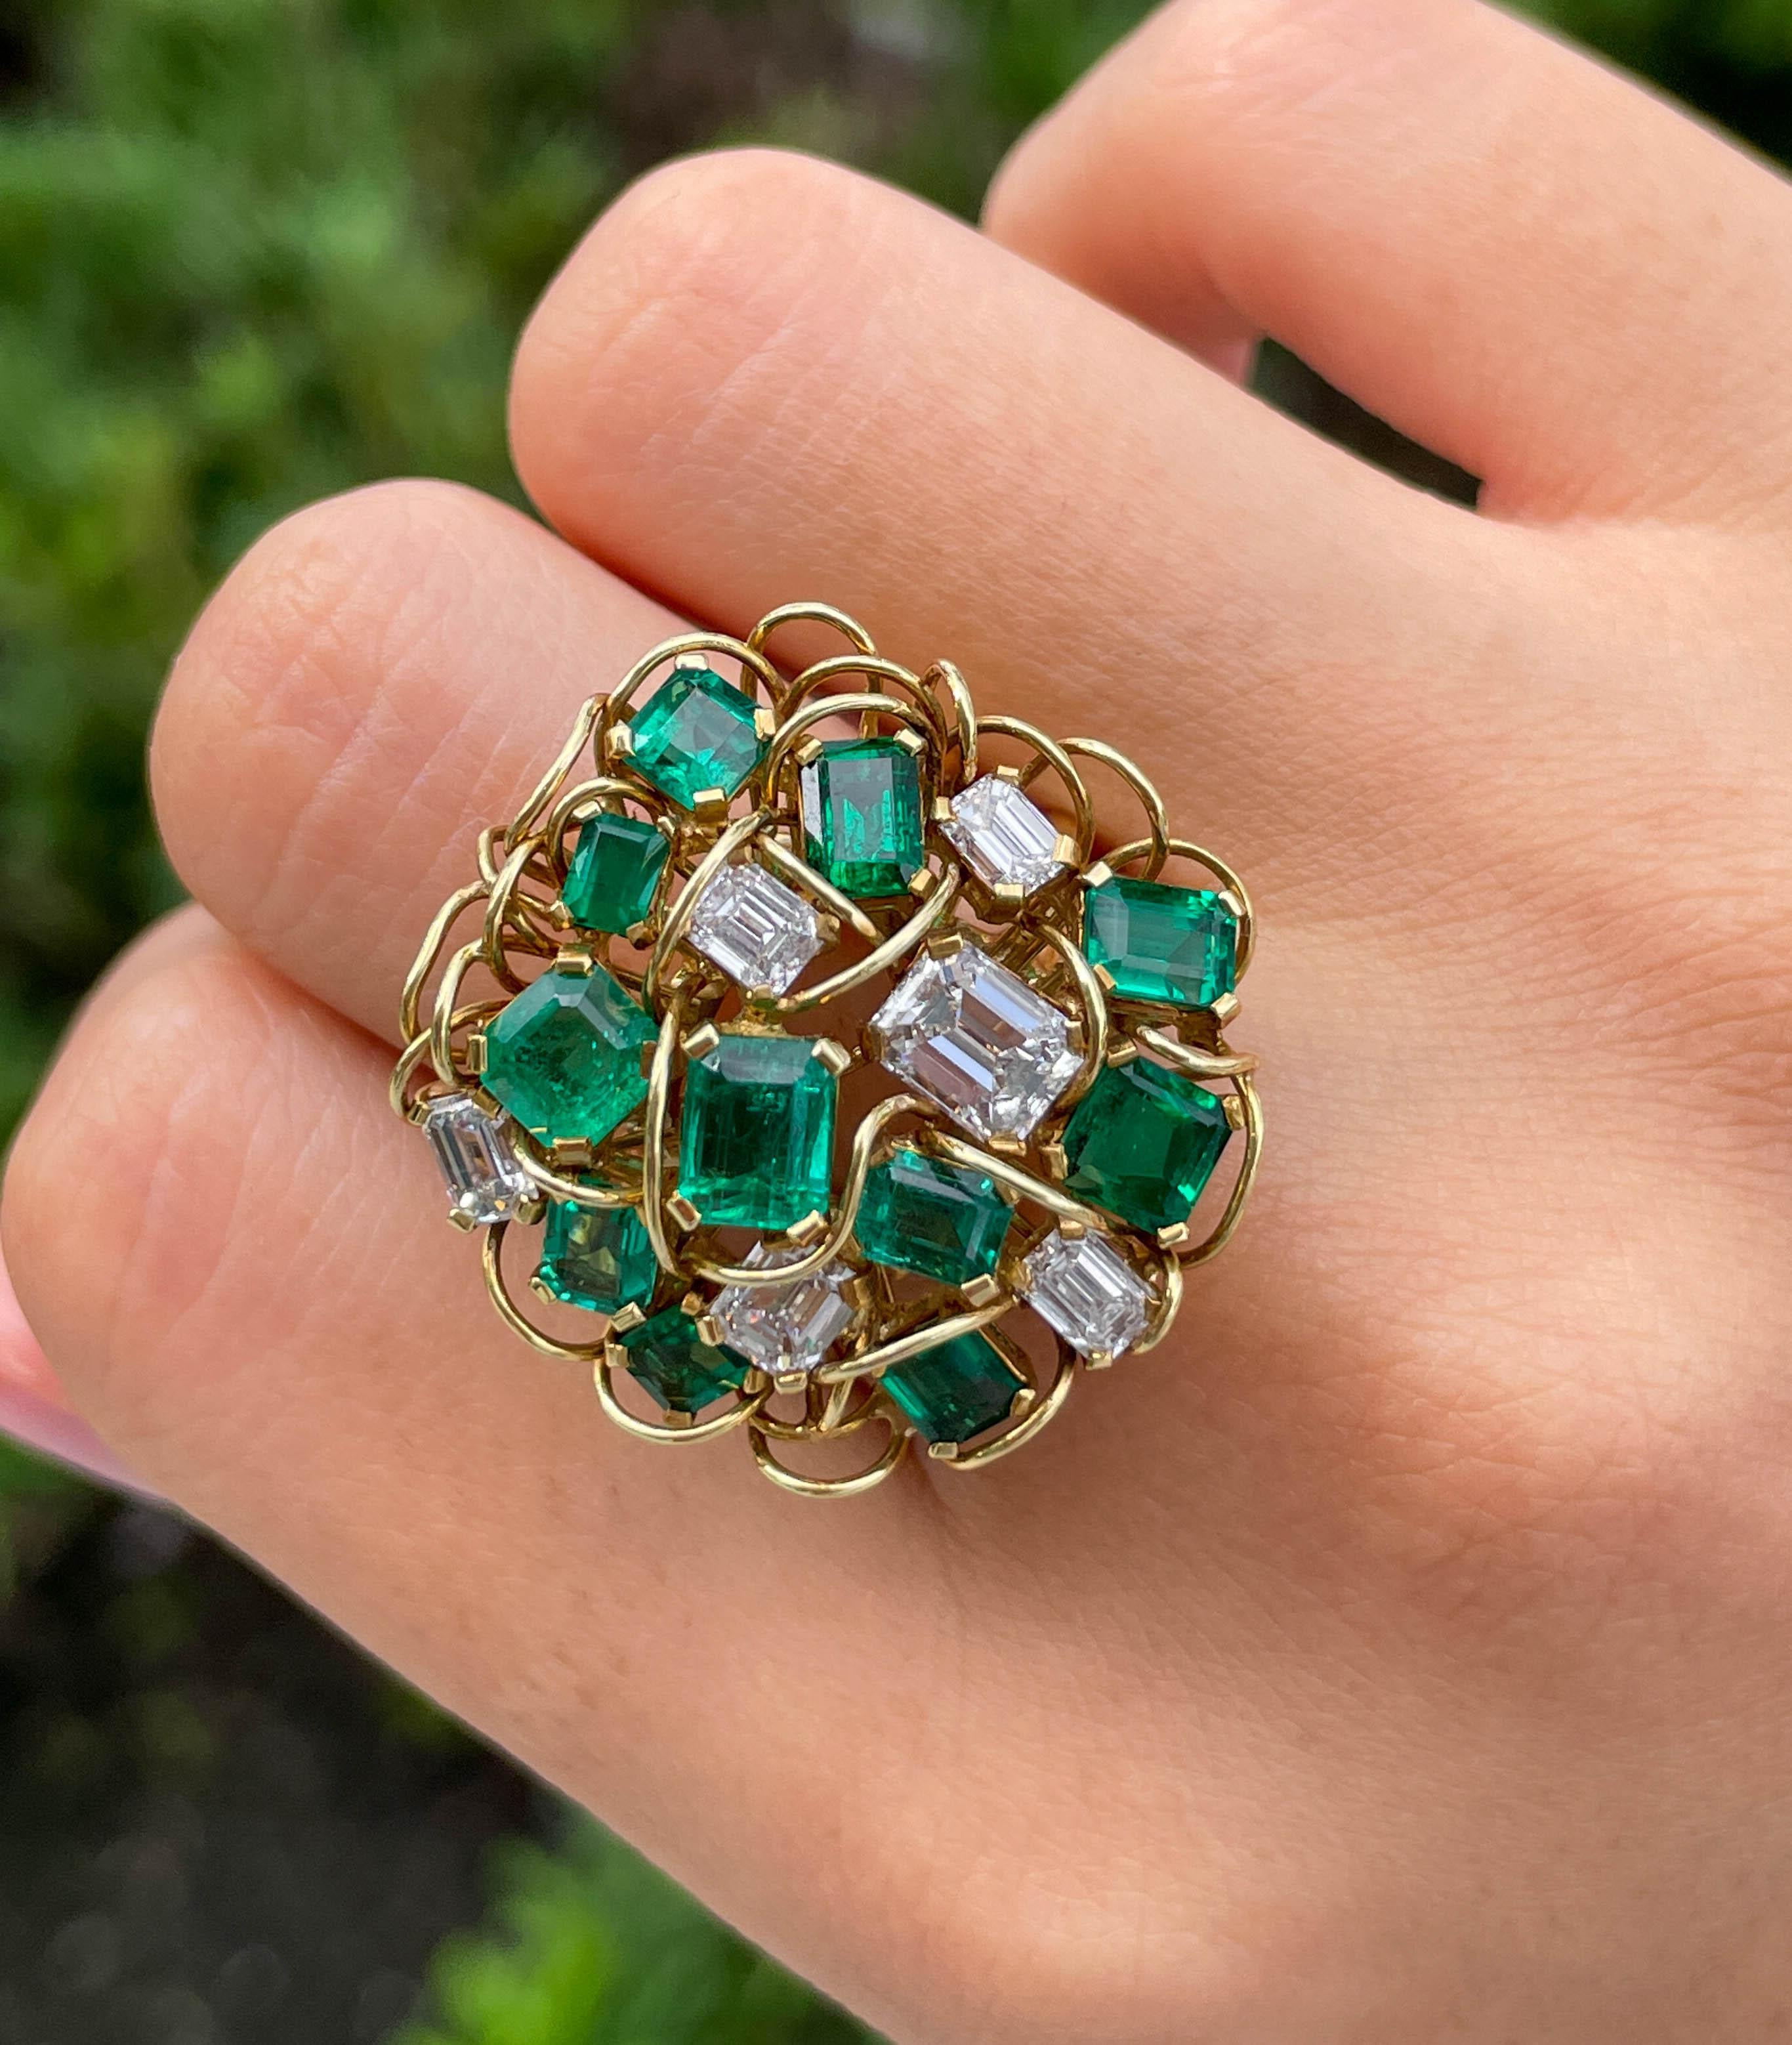 Jay Feder Green Emerald and Emerald cut Diamond ring in 18k Yellow gold 
There are 11 Green Emeralds (7.70 carat total) and 6 Emerald cut diamonds (6.0 carat total).
The top’s measurements are 22x22mm. The band’s width tapers from 9.49mm to 3.92mm